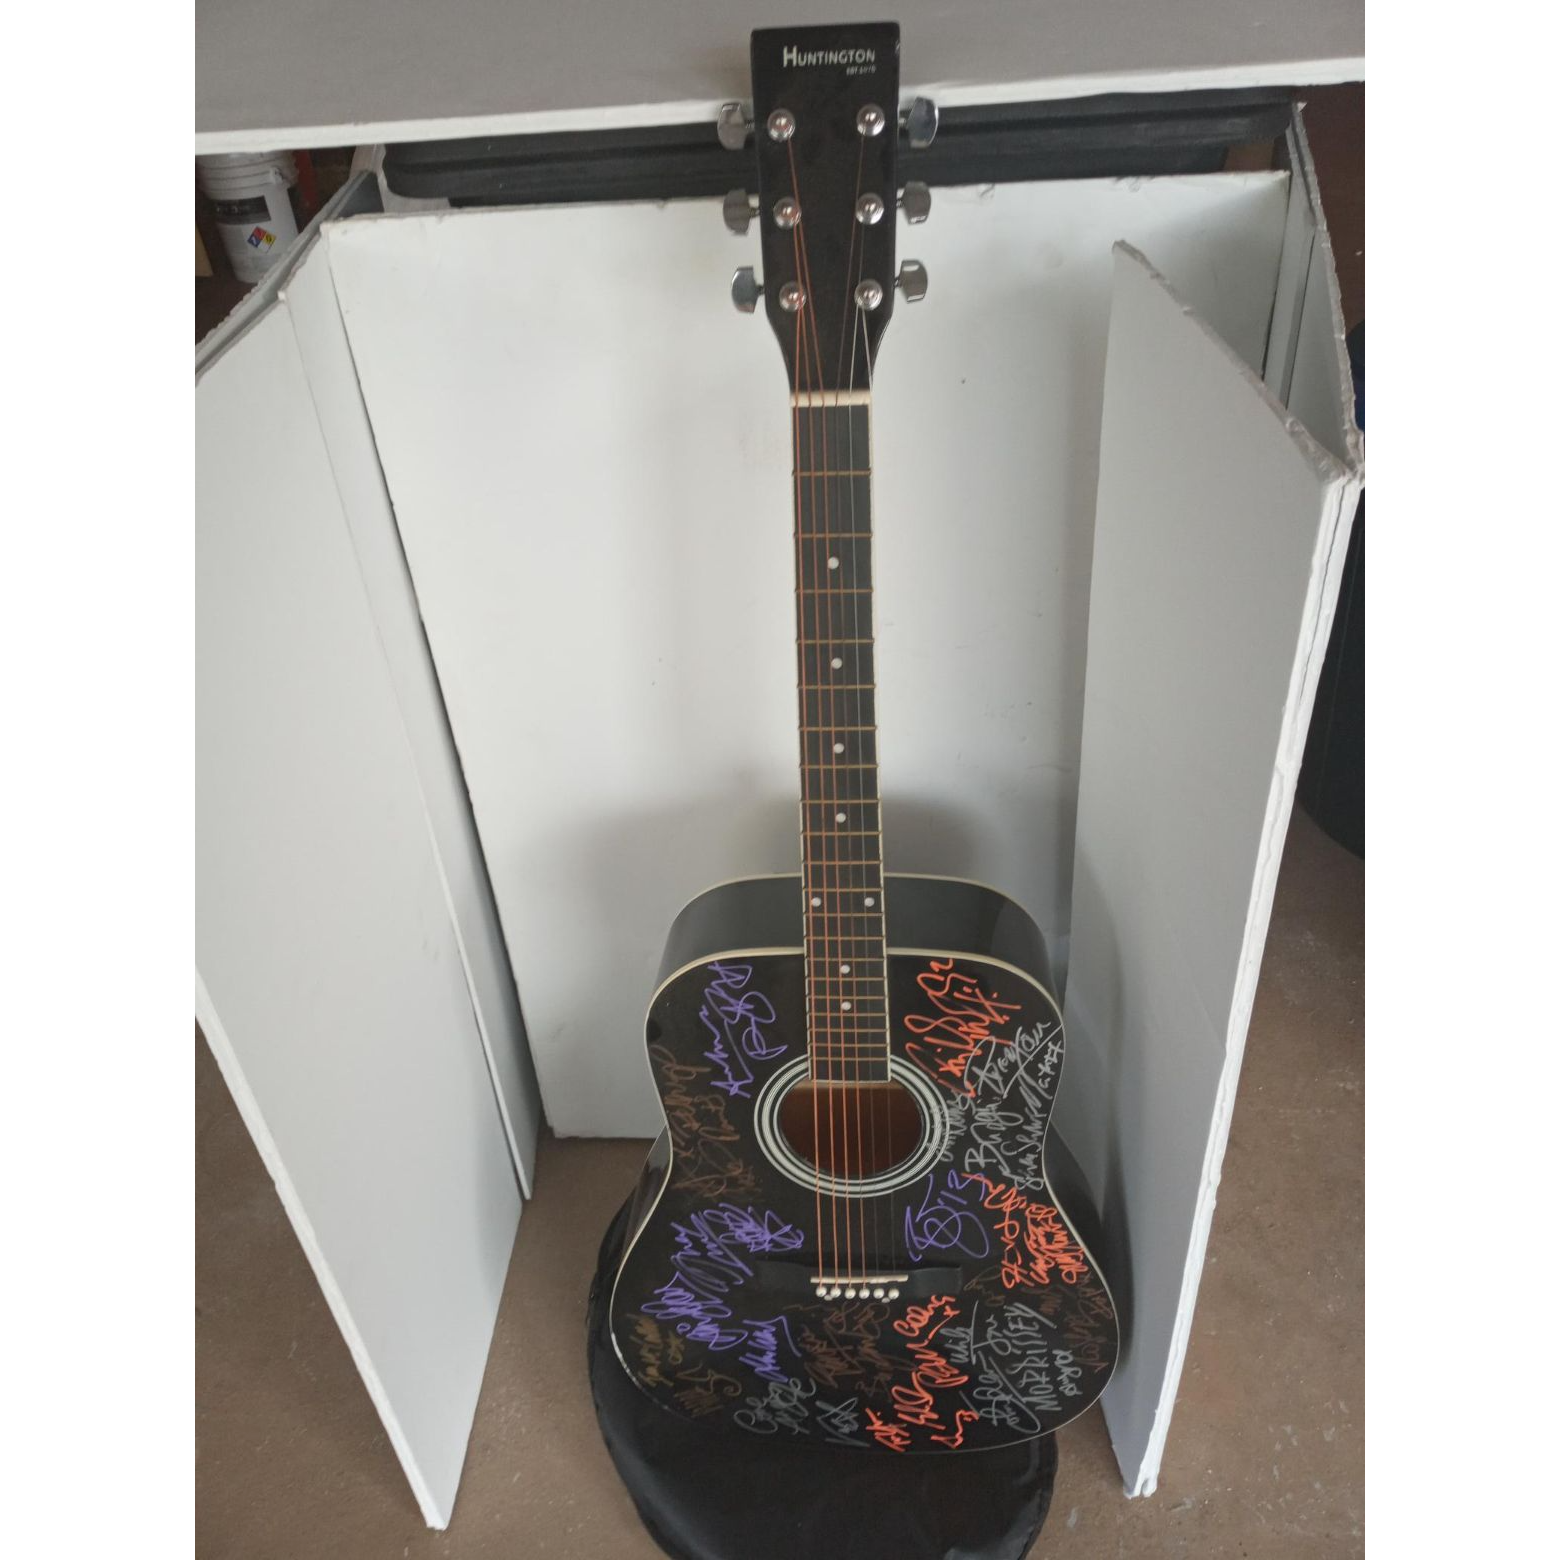 Depeche Mode, The Smiths, The Cure, Billy Idol, Huntington acoustic guitar signed with proof